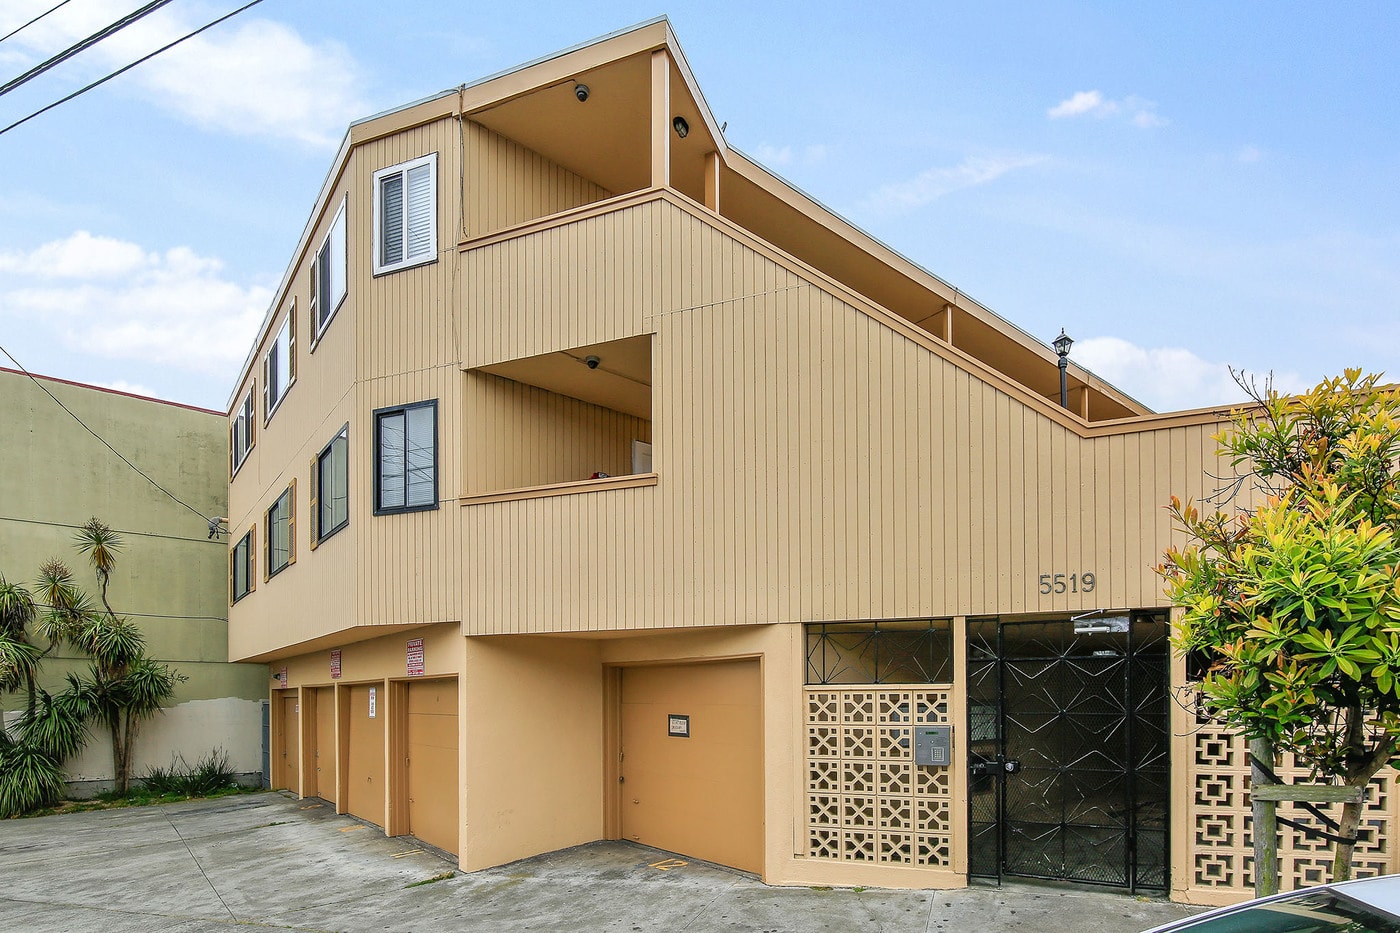 5519 Mission Street, San Francisco, Multi-Family Investment For Sale, Located In Outer Mission